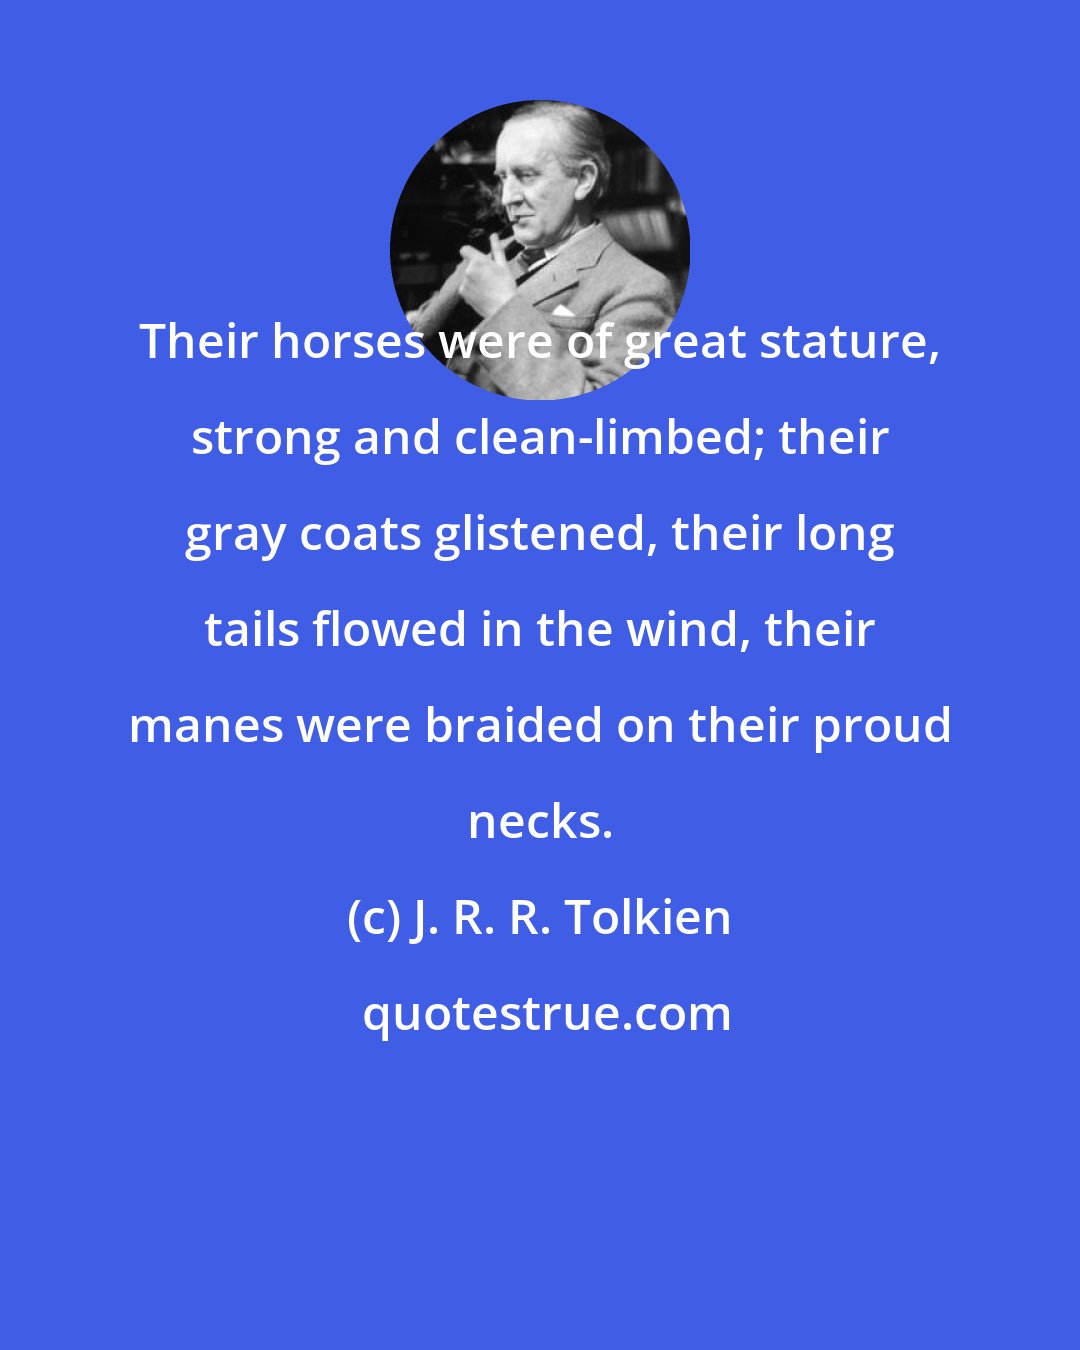 J. R. R. Tolkien: Their horses were of great stature, strong and clean-limbed; their gray coats glistened, their long tails flowed in the wind, their manes were braided on their proud necks.